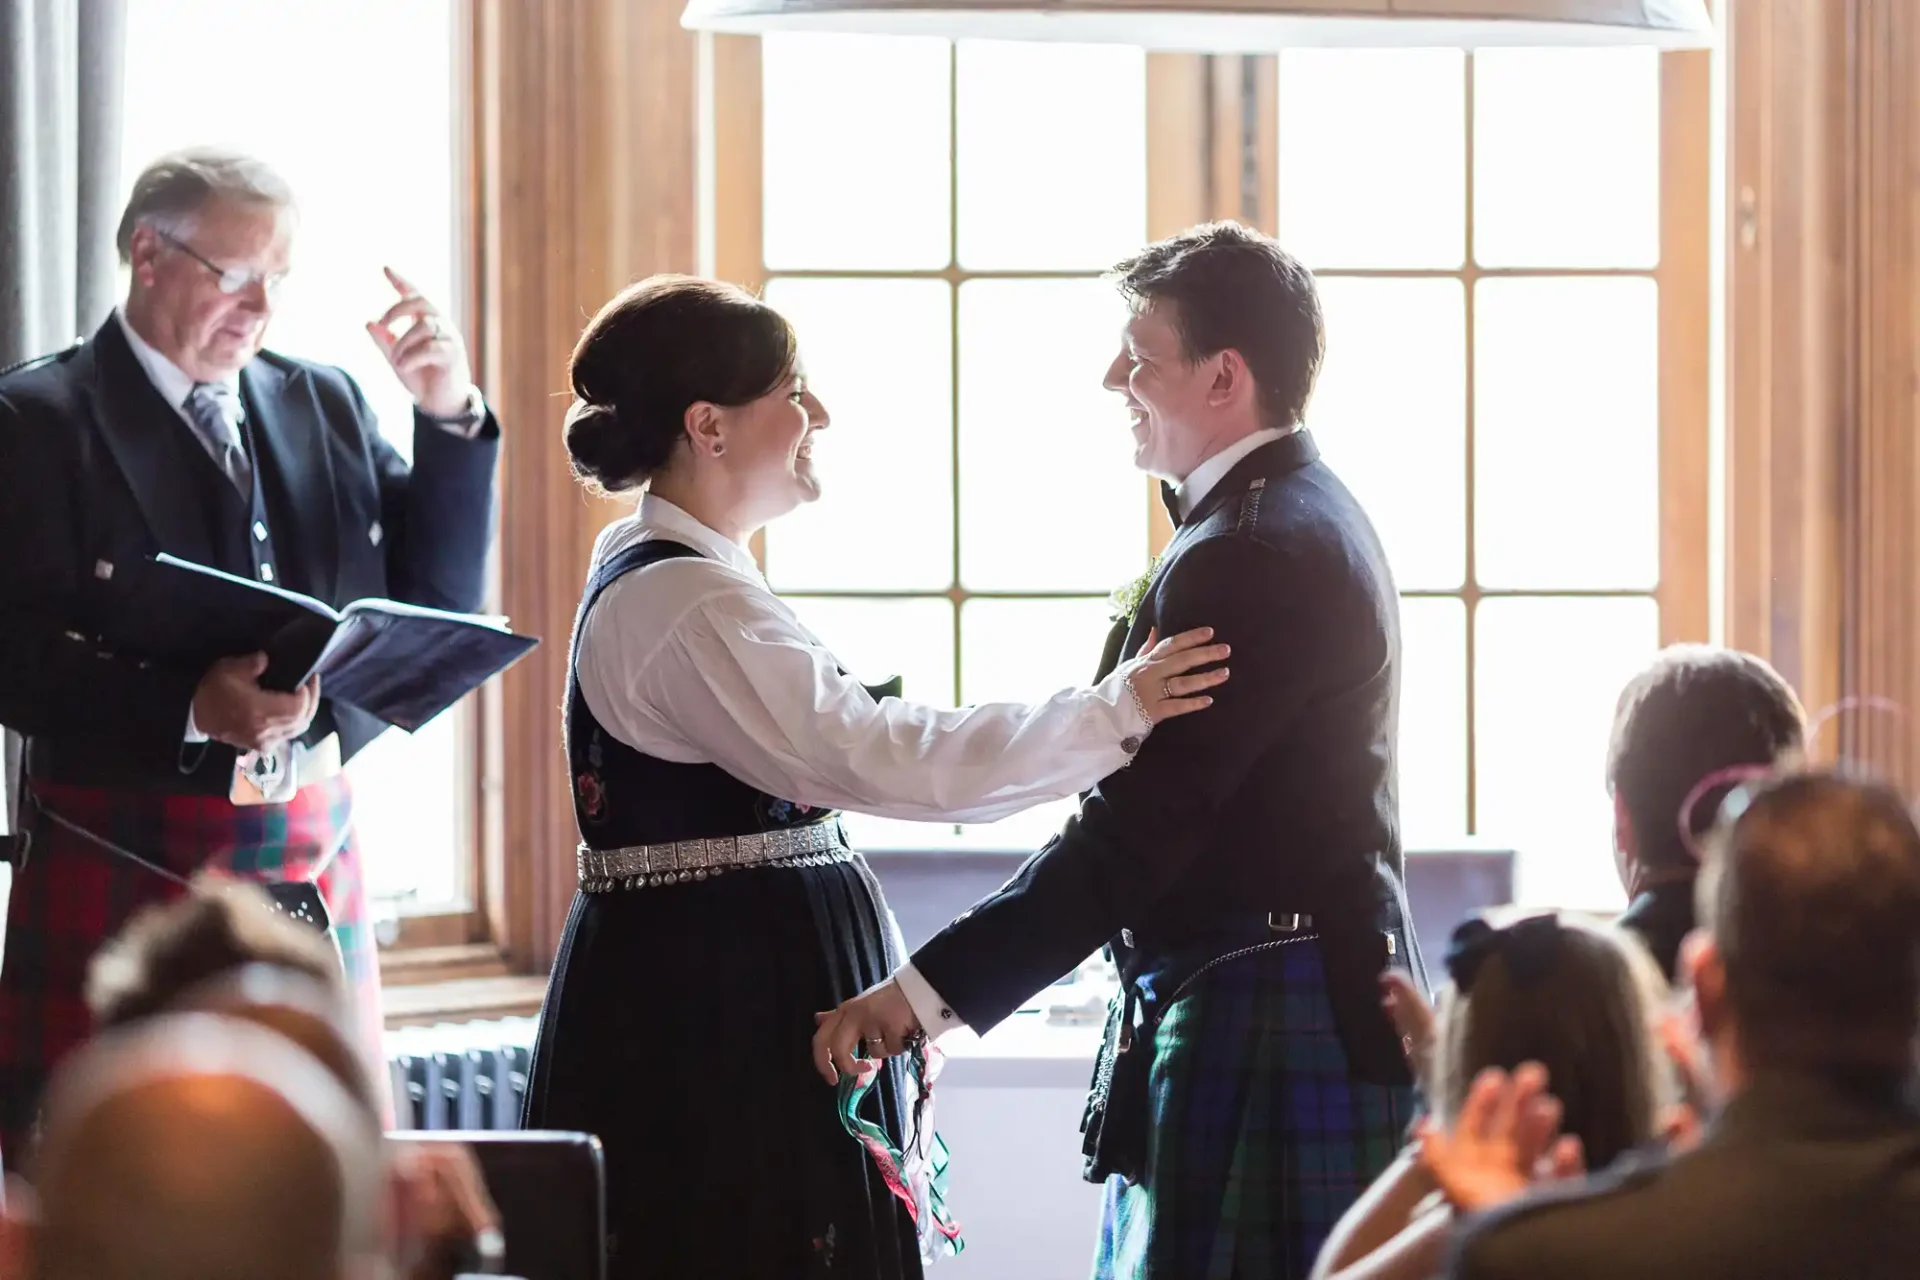 A bride and groom in traditional scottish attire exchange vows at a wedding ceremony, with an officiant and guests in the background.